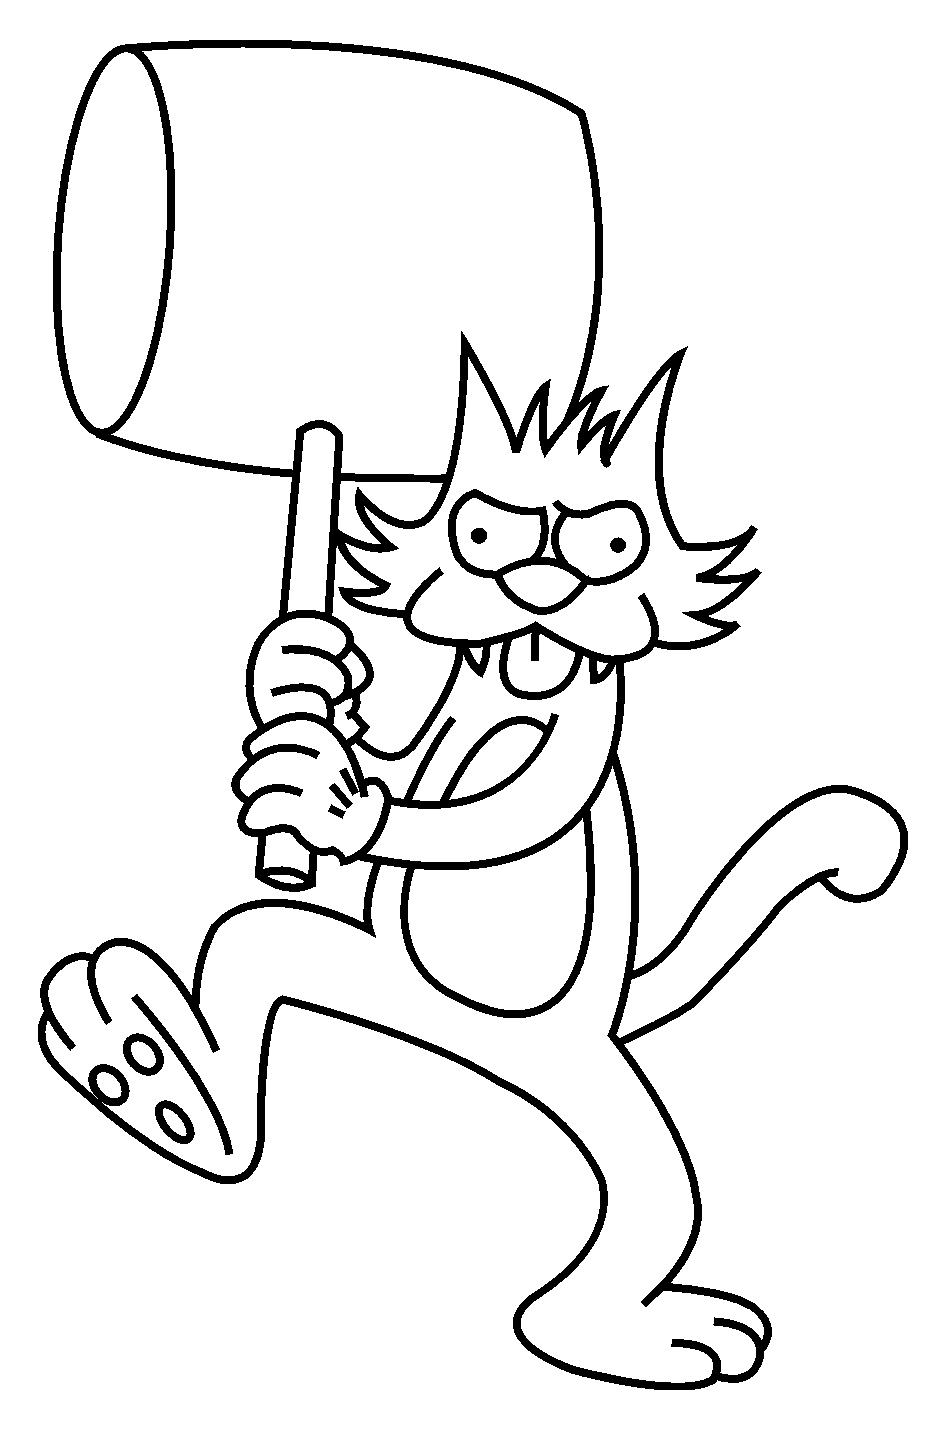 Image of The Simpsons to print and color - The Simpsons Kids Coloring Pages